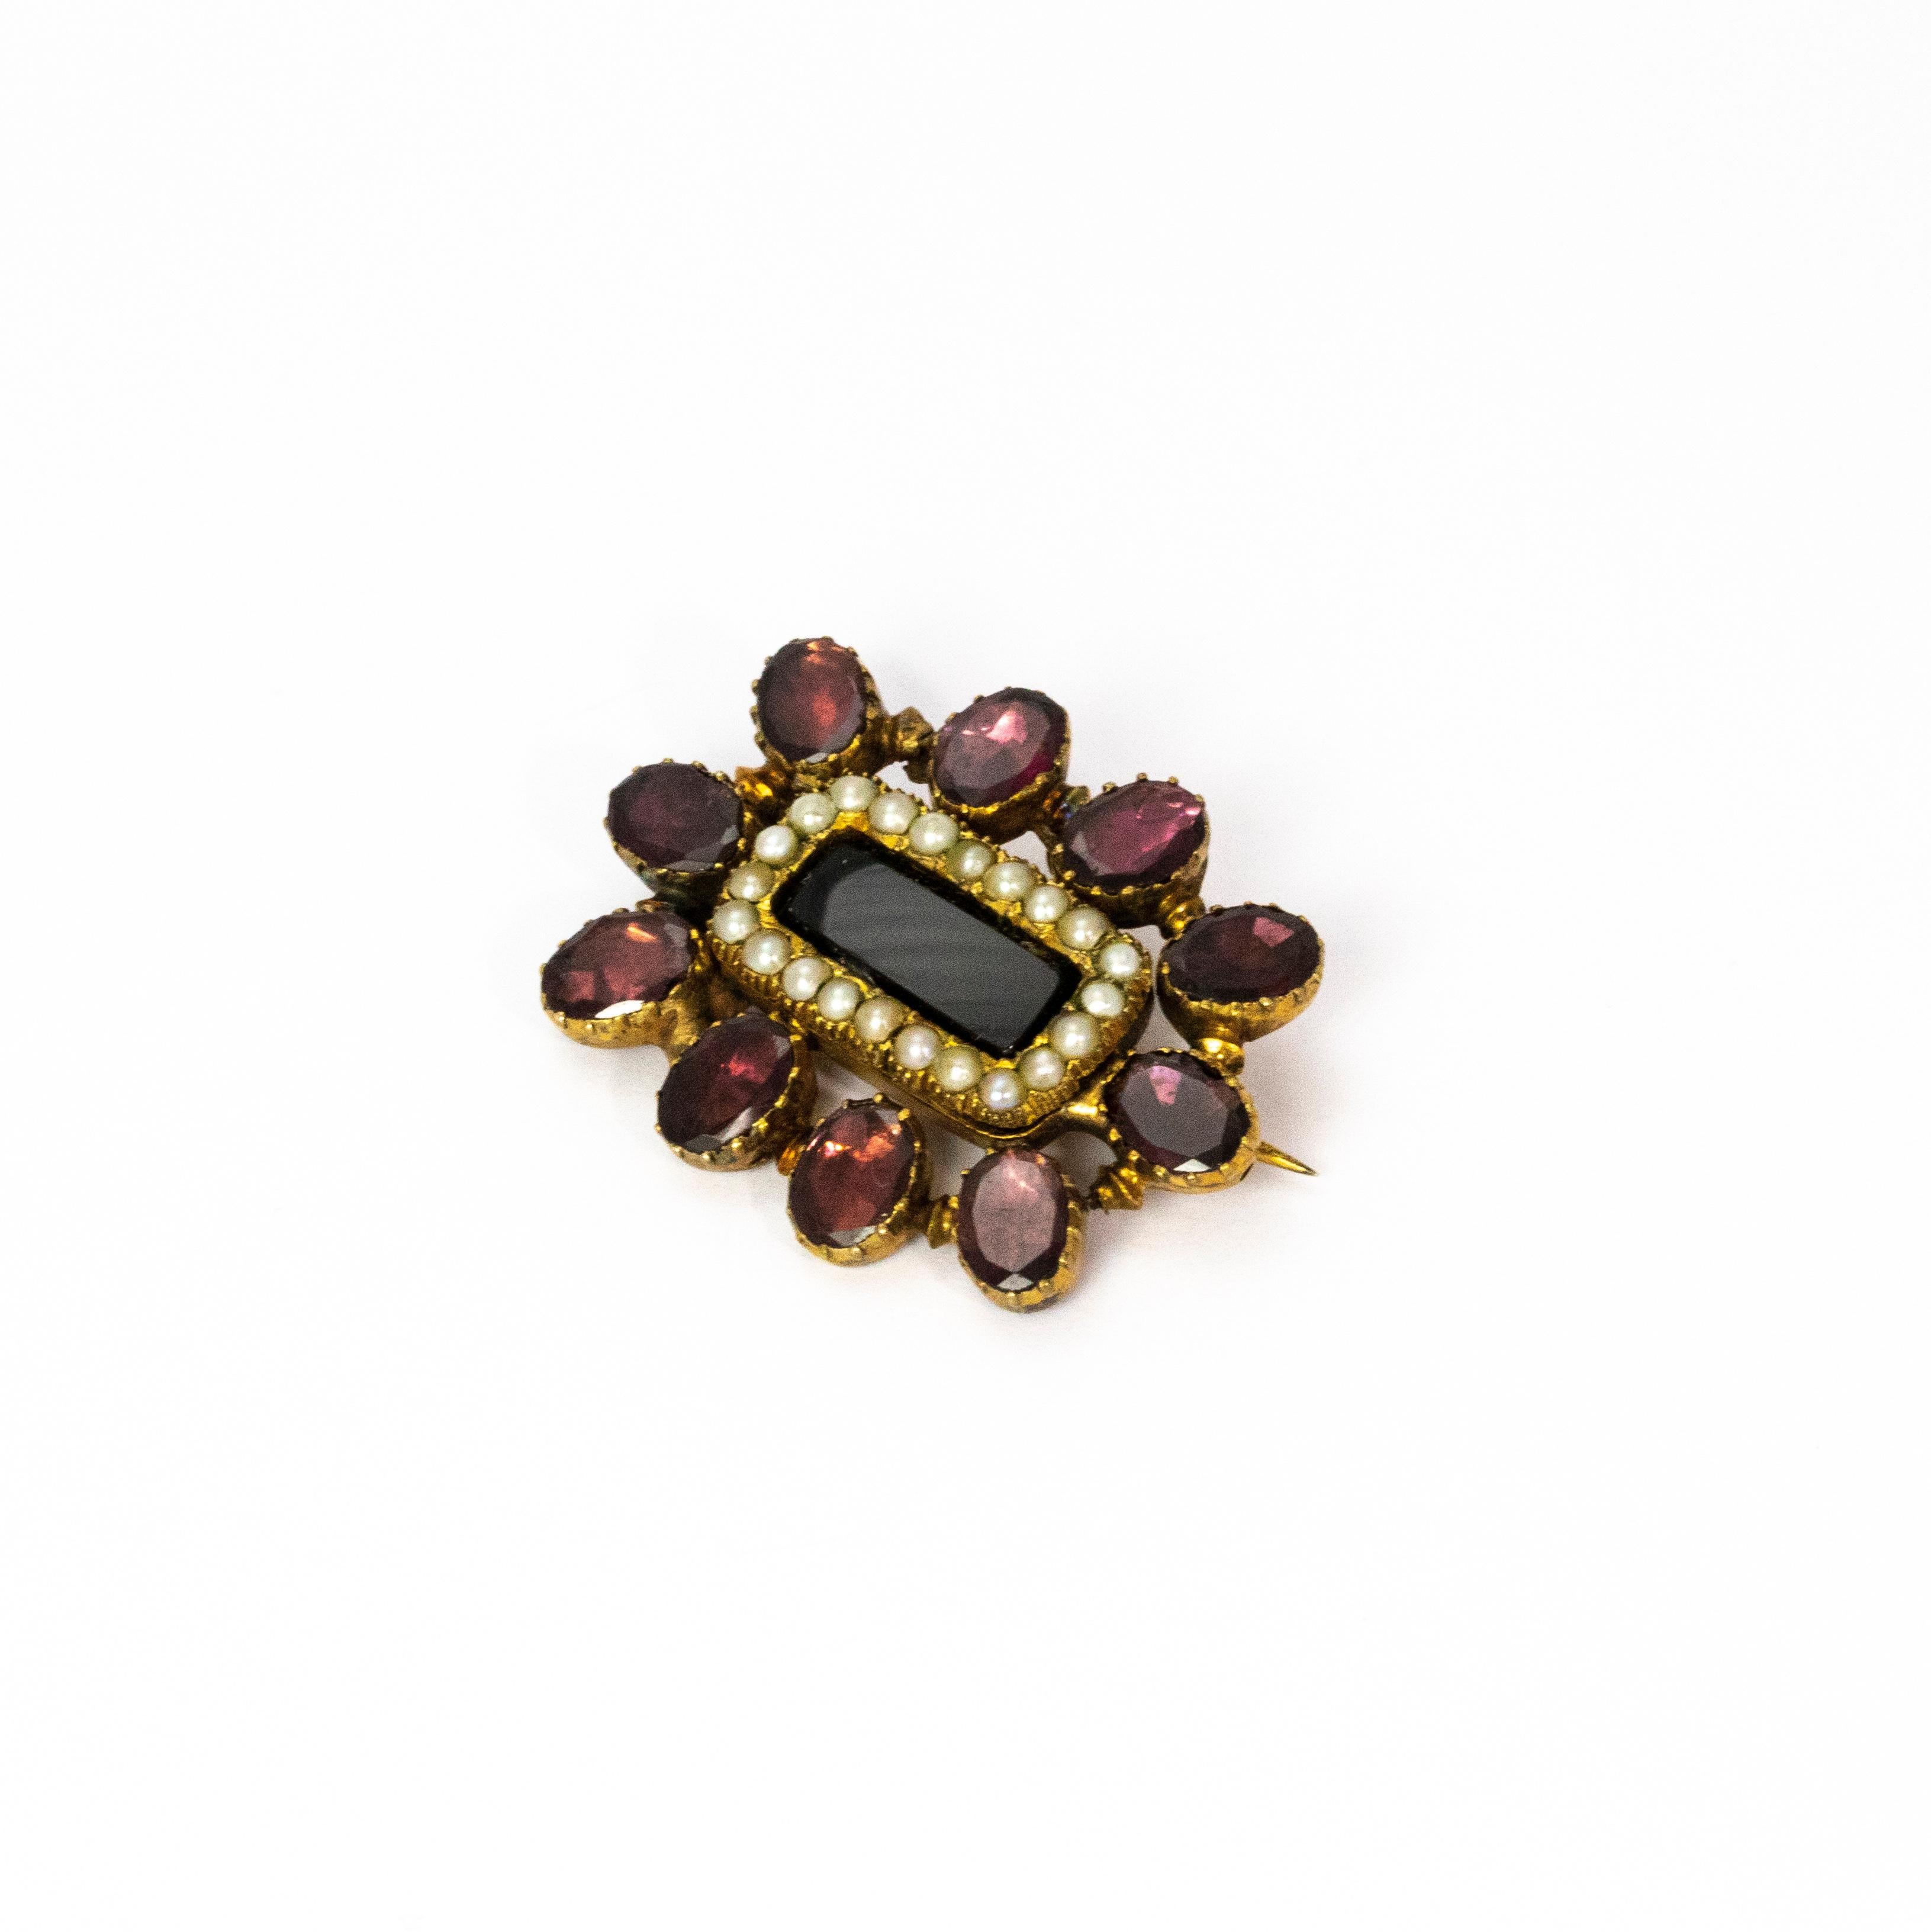 A beautiful memorial brooch from the Georgian era . The outer edge is lined with ten stunning red flat cut garnets, with an inner circuit of split seed pearls. Modelled in 9 karat yellow gold